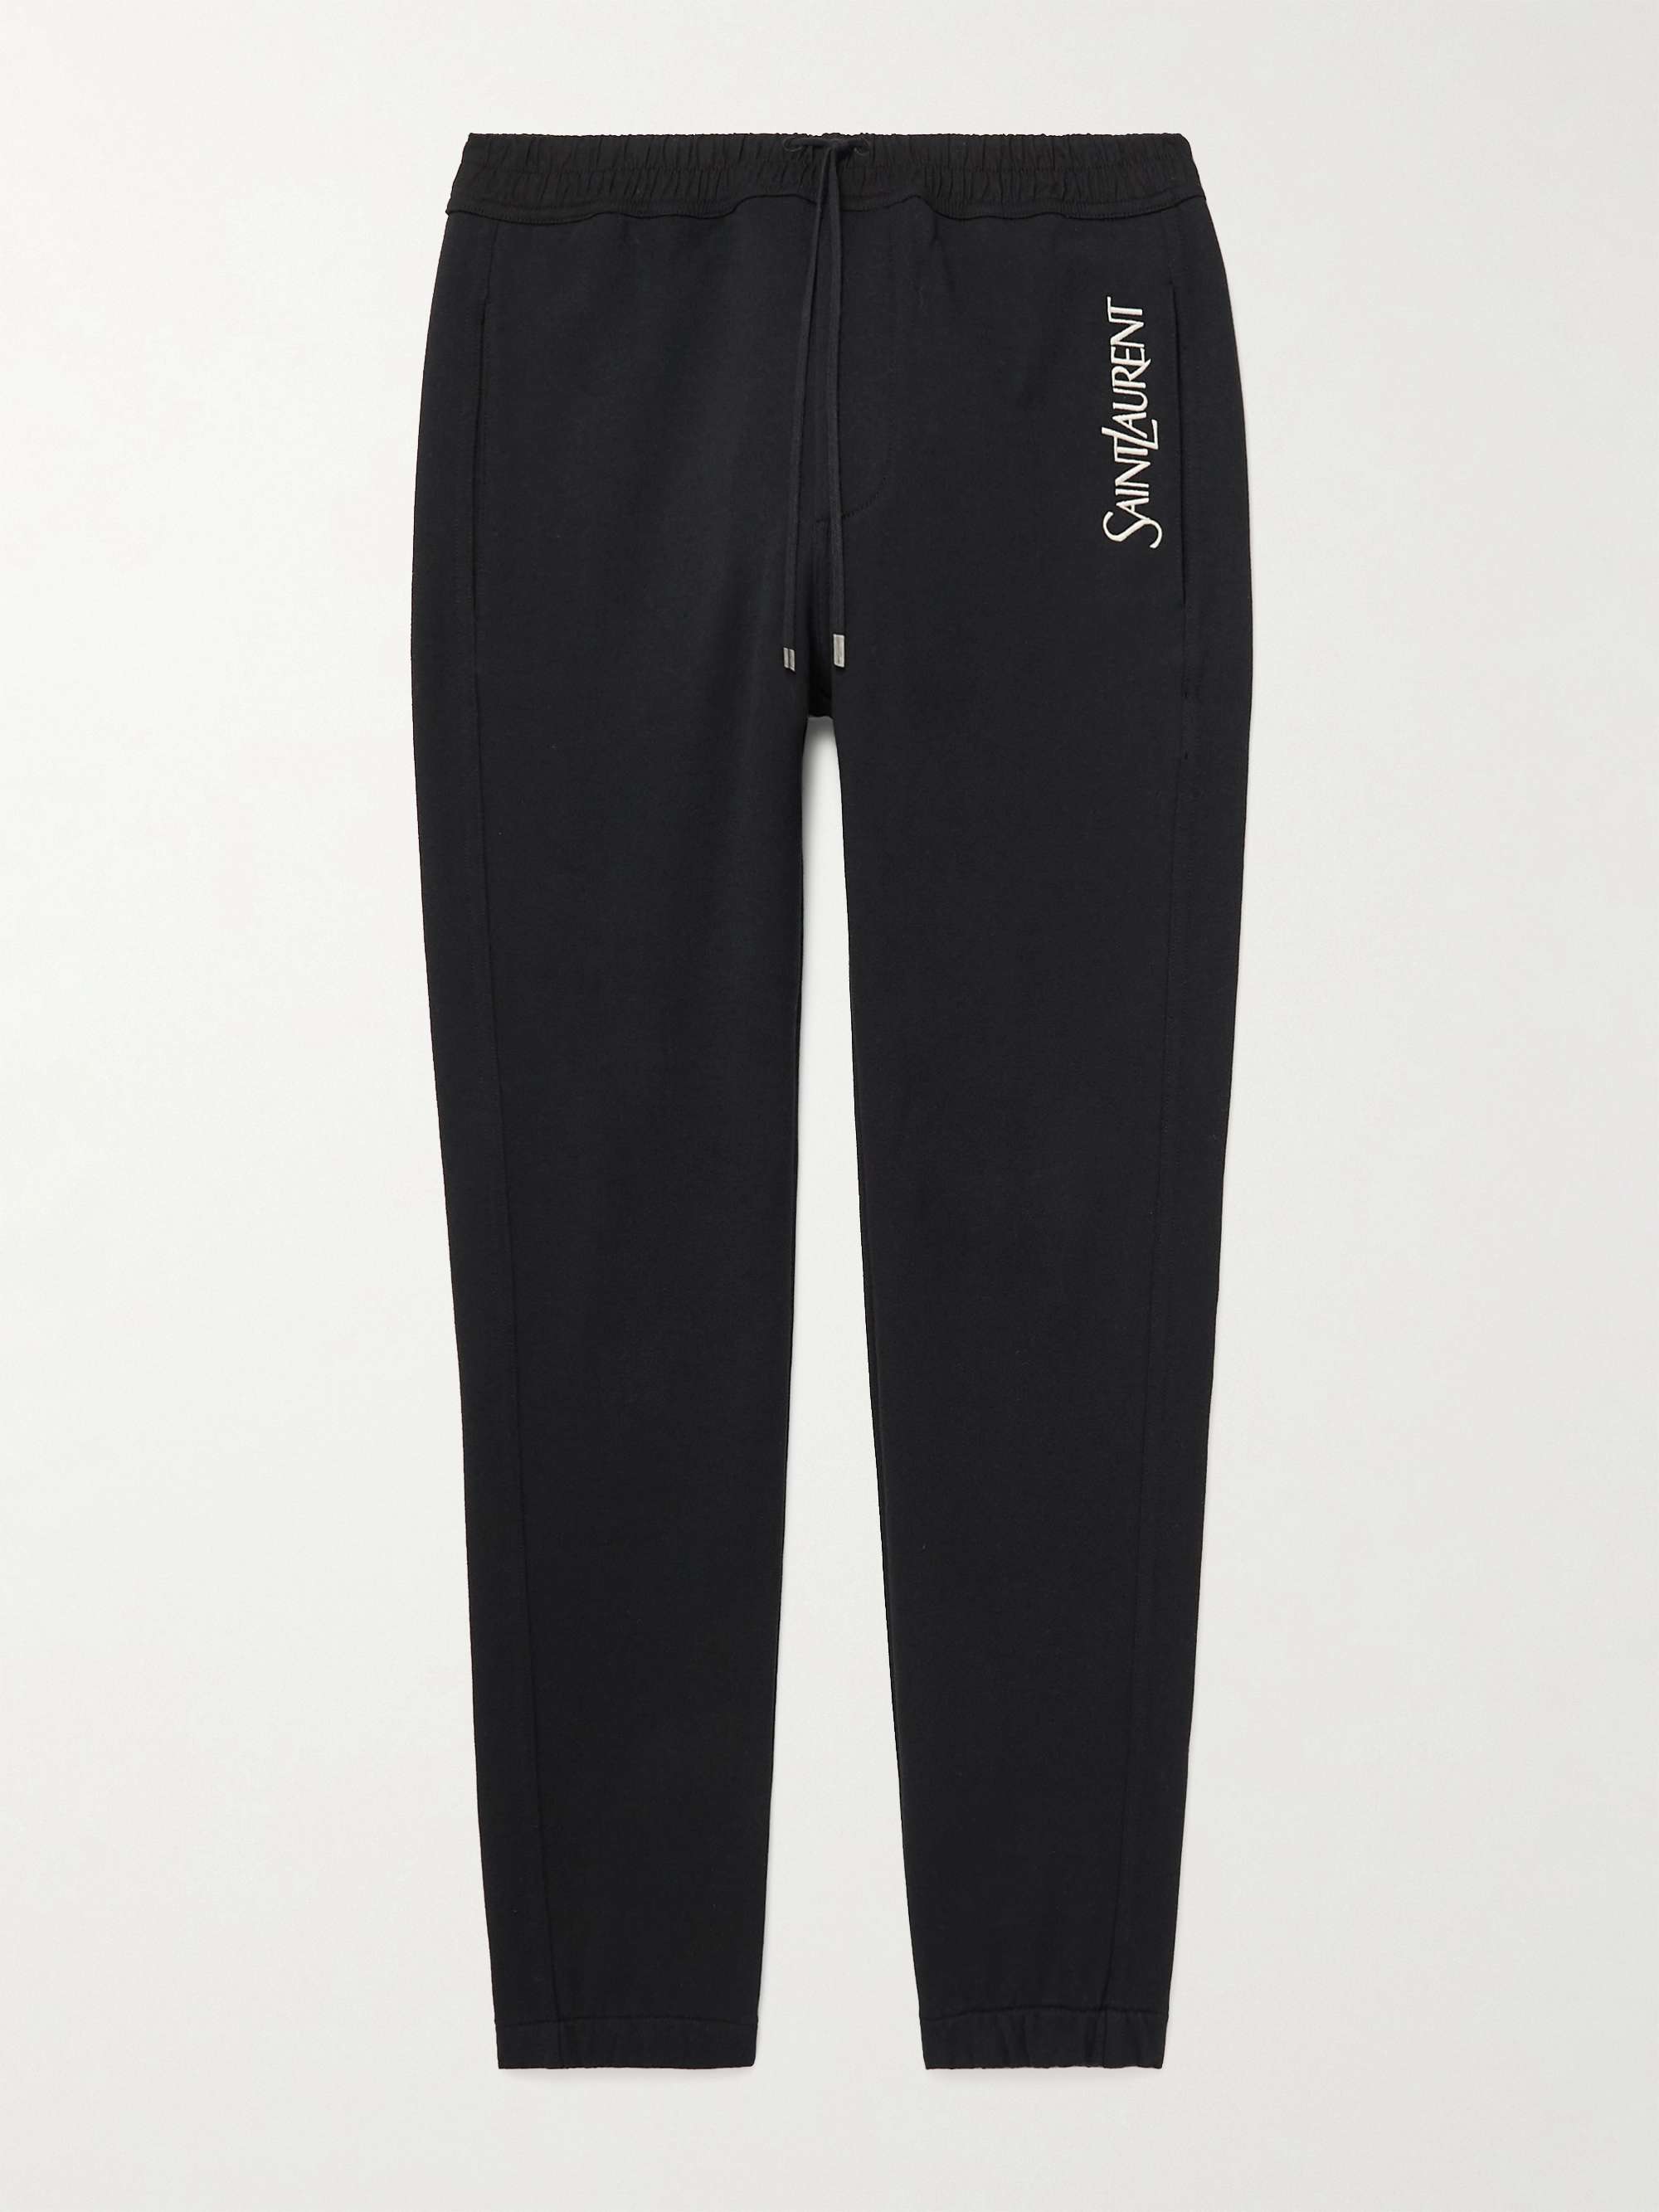 SAINT LAURENT Tapered Logo-Embroidered Cotton-Jersey Sweatpants